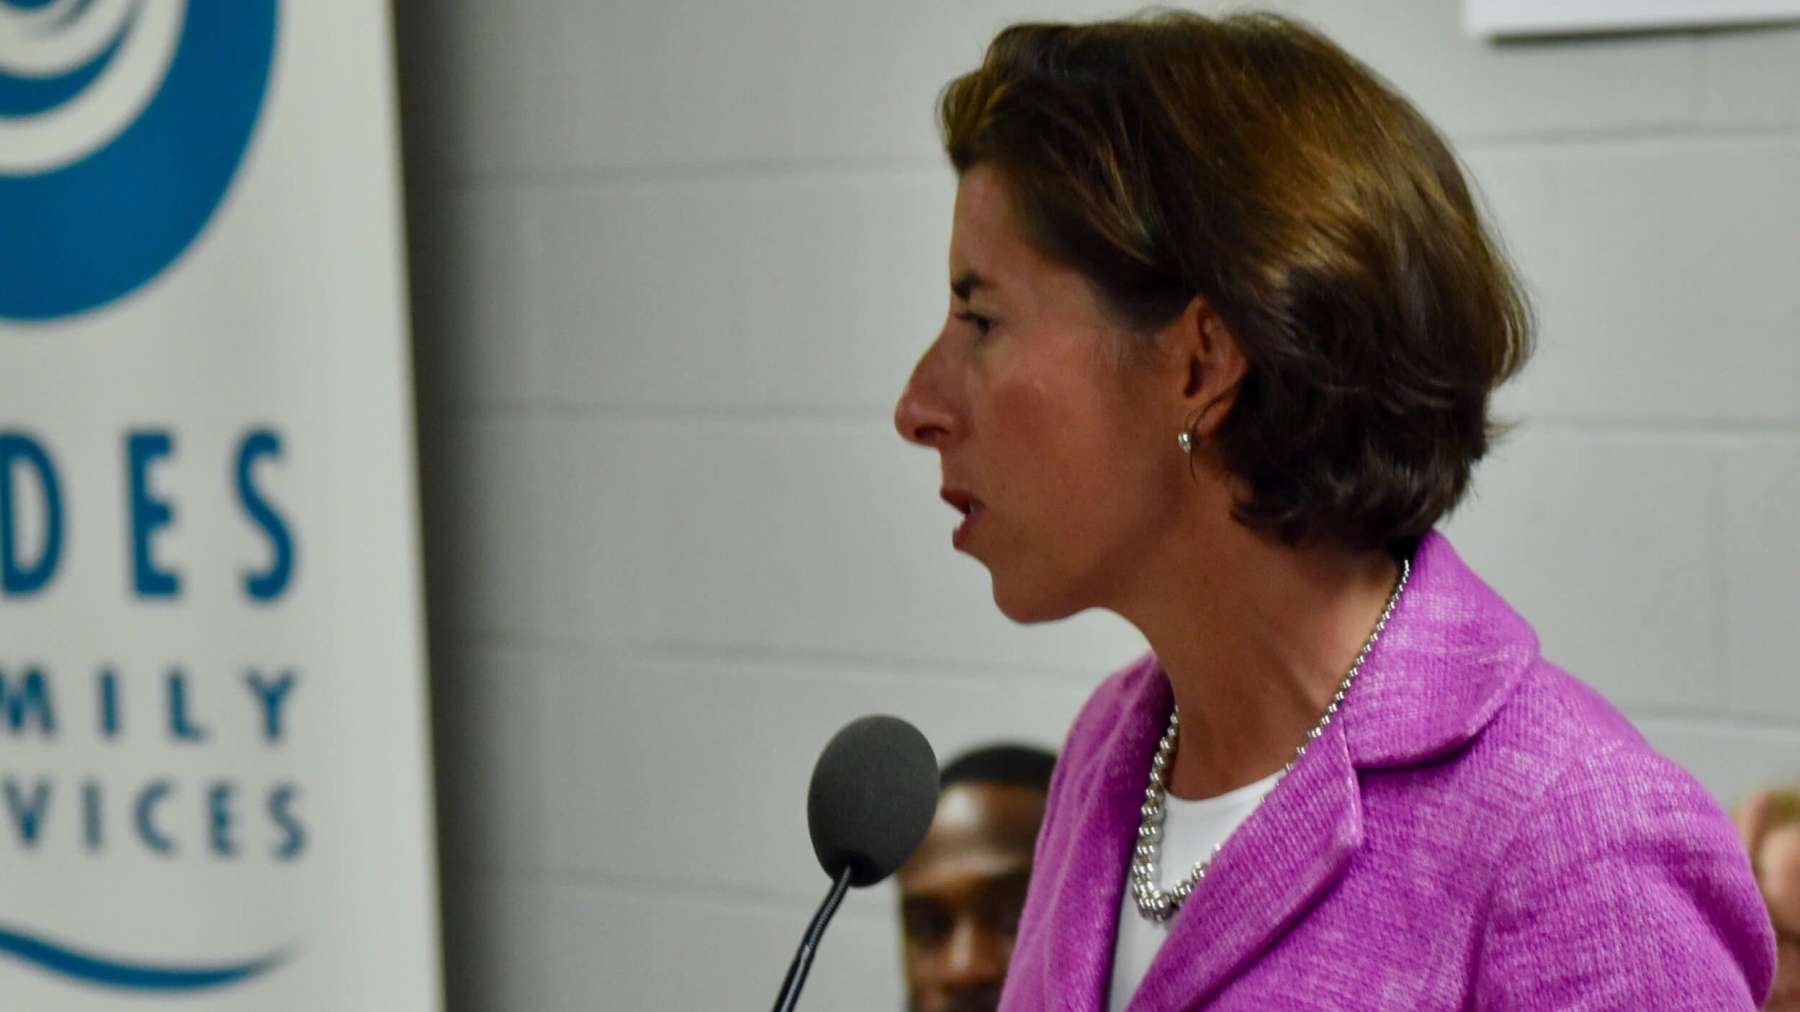 Governor Gina Raimondo commits to including a non-binary marker on drivers licenses and birth certificates within the next year